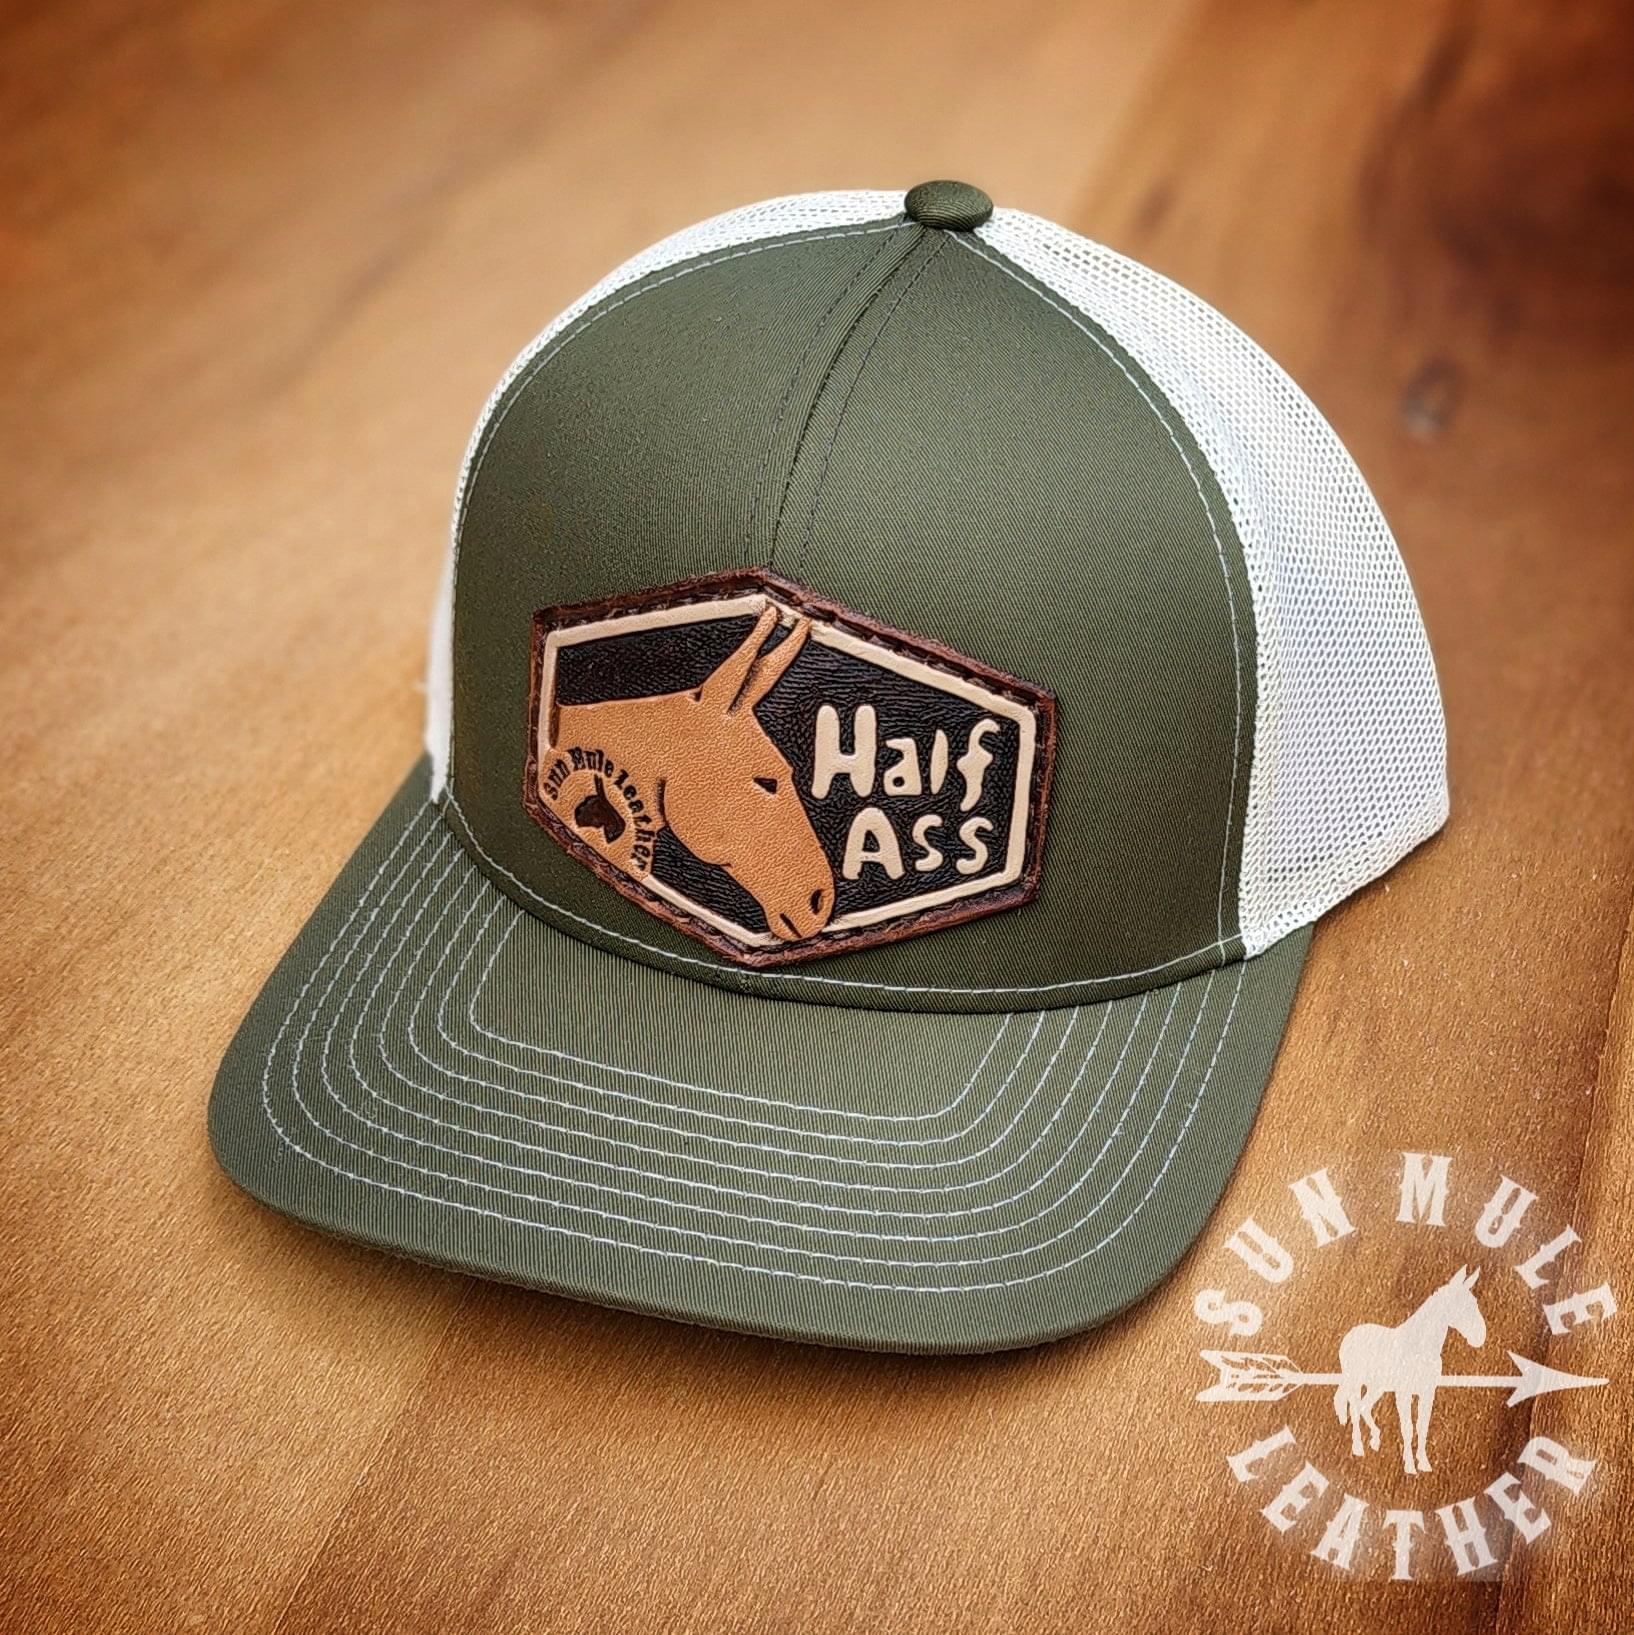 Half ass mule hat in moss green with hand tooled letters and a mule. 